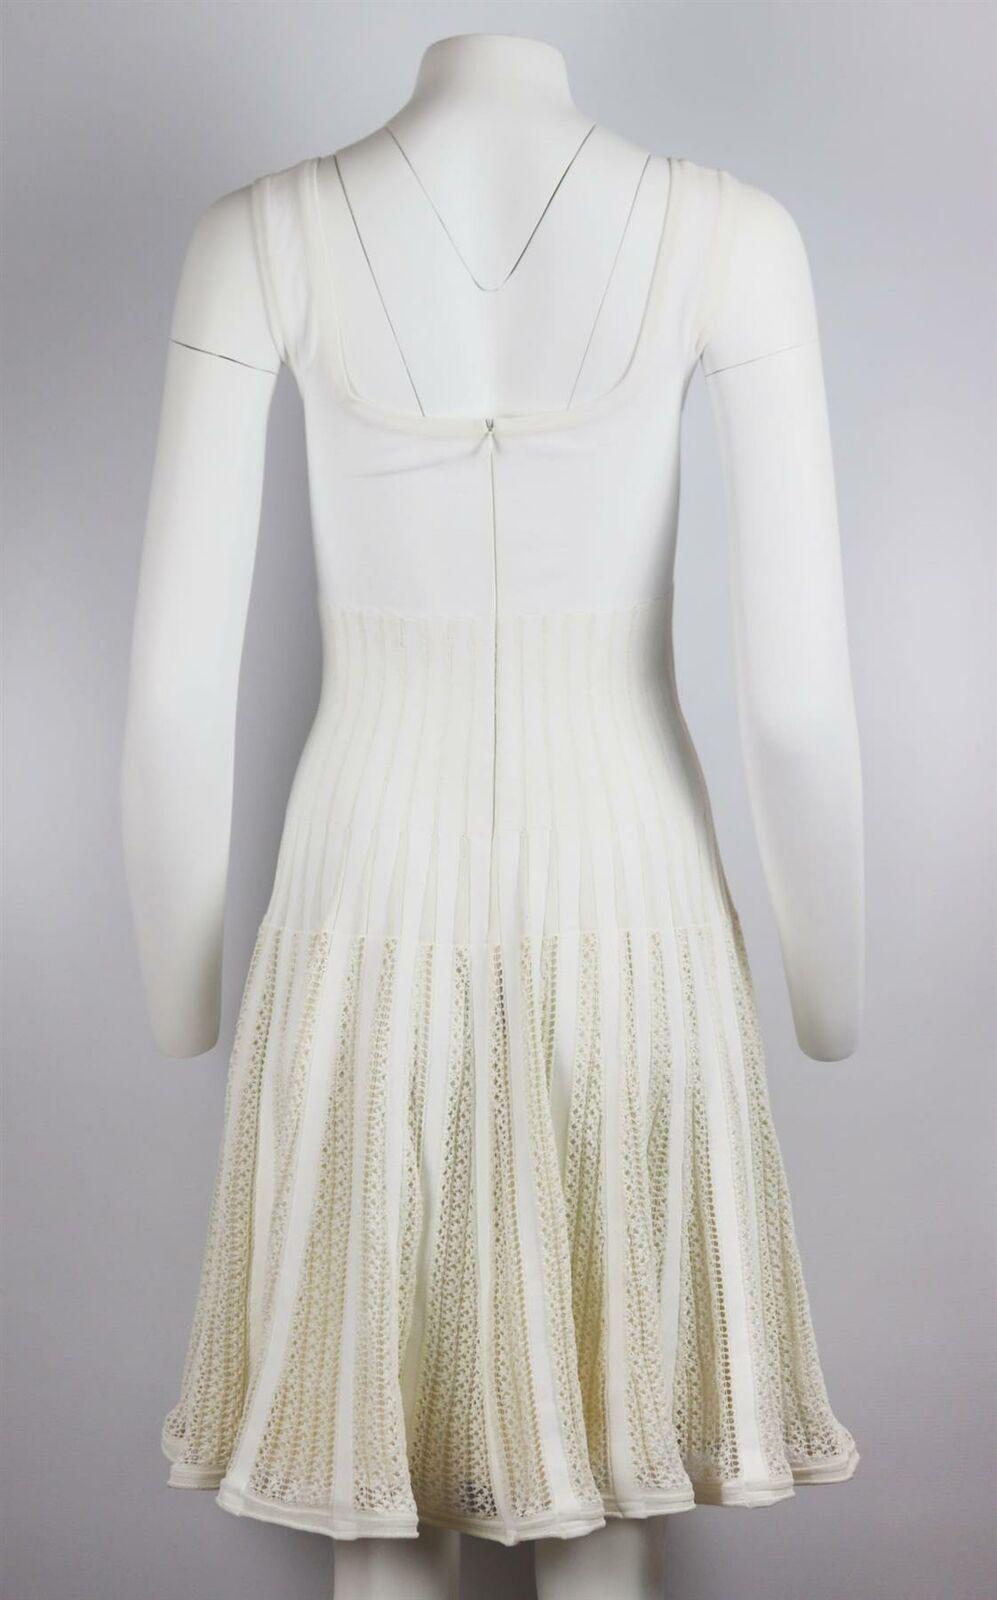 Azzedine Alaïa Crocheted Cotton Blend Mini Dress In Excellent Condition In London, GB